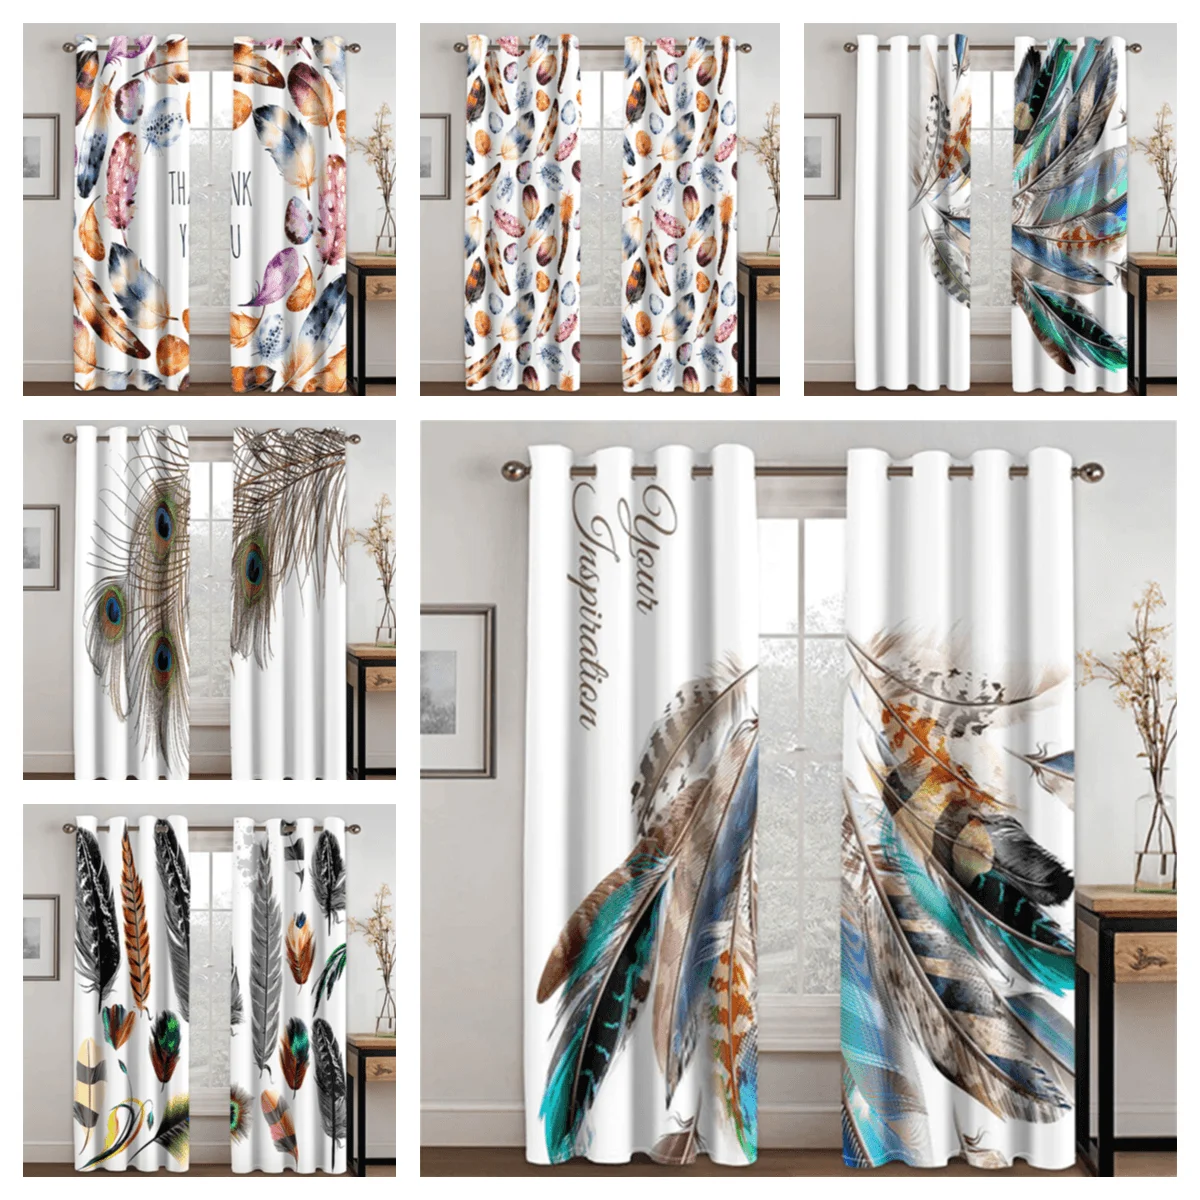 

Curtains for Living Room Waterproof Window Bedroom Decoration Colored Feathers Kitchen Space Divider Luxury Printed Home Custom